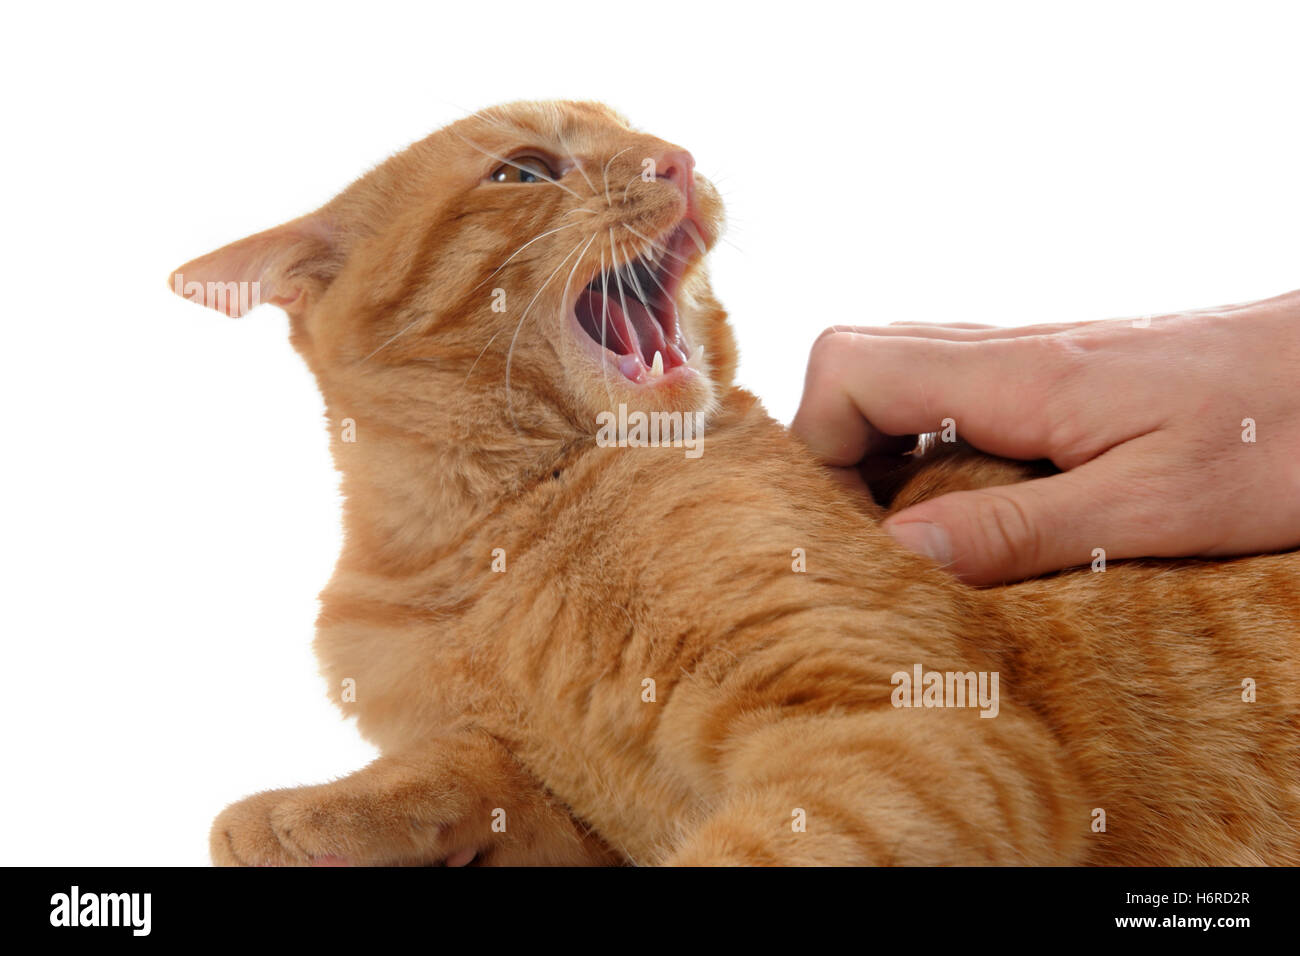 teeth anger resentment annoy raving furious angry irately aggressive agressive stroking pussycat cat domestic cat hand animal Stock Photo